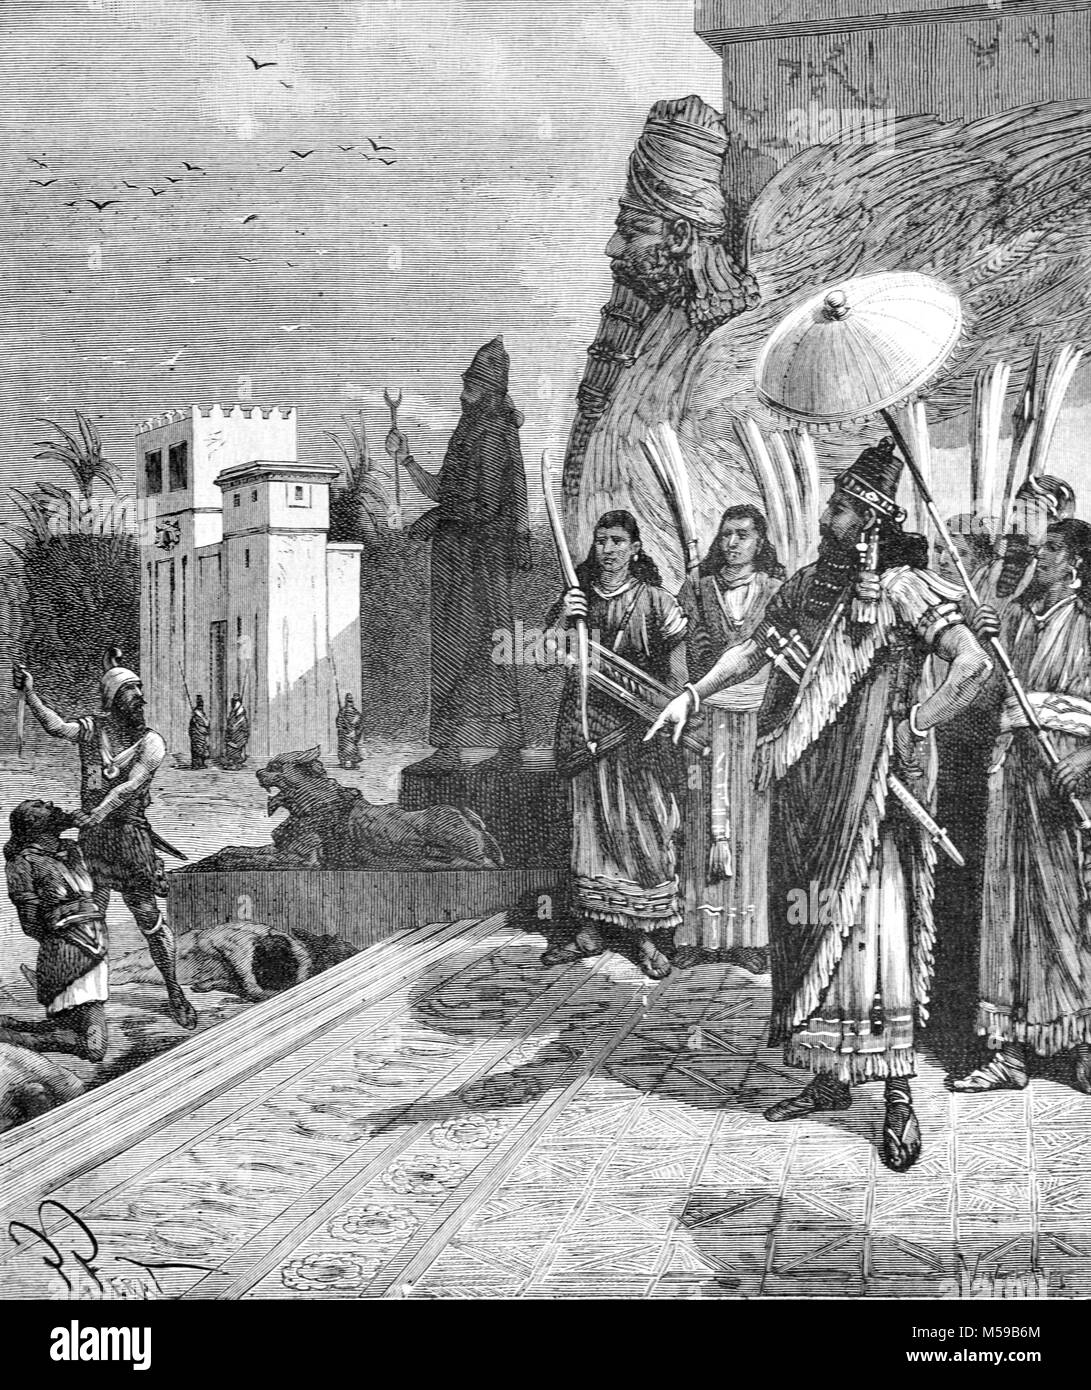 Assyrian King Orders Execution of Prisoners or Captives in the Assyrian Capital of Assur or Nineveh, Mesopotamia, present-day Iraq (Engraving, 1889) Stock Photo